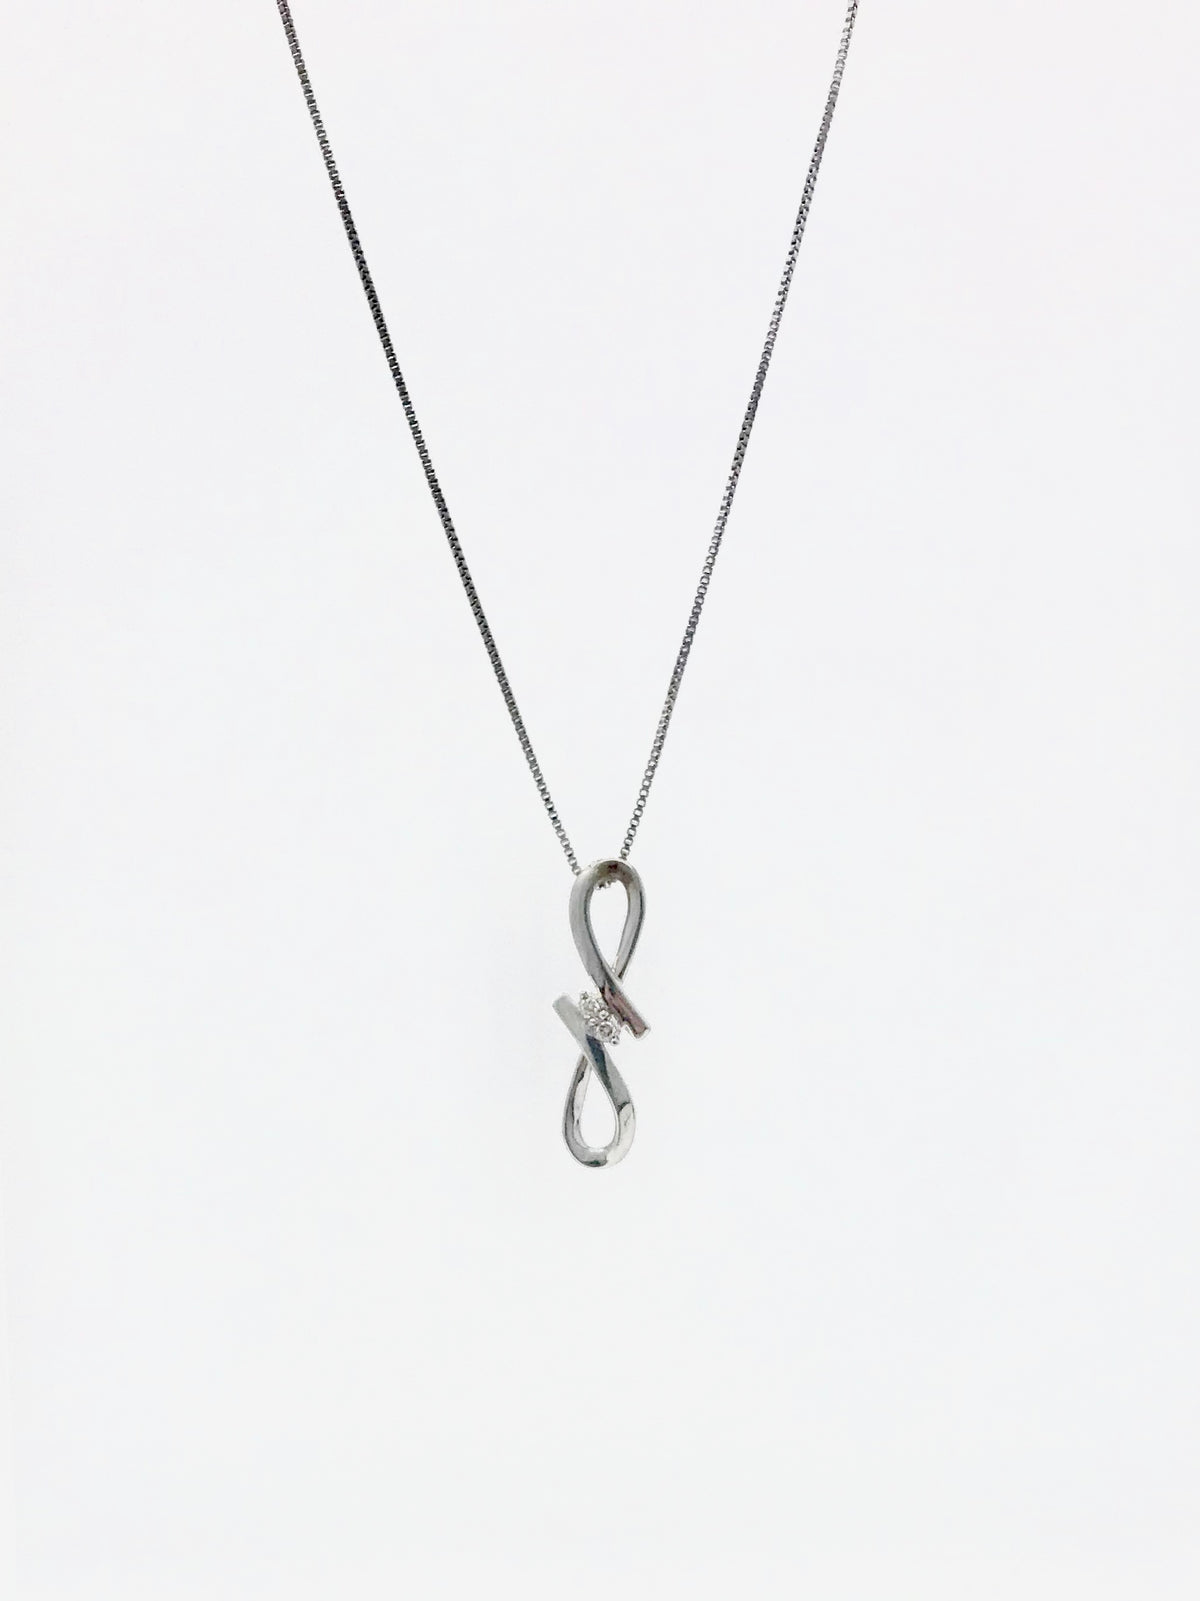 Silver and Diamond Necklace